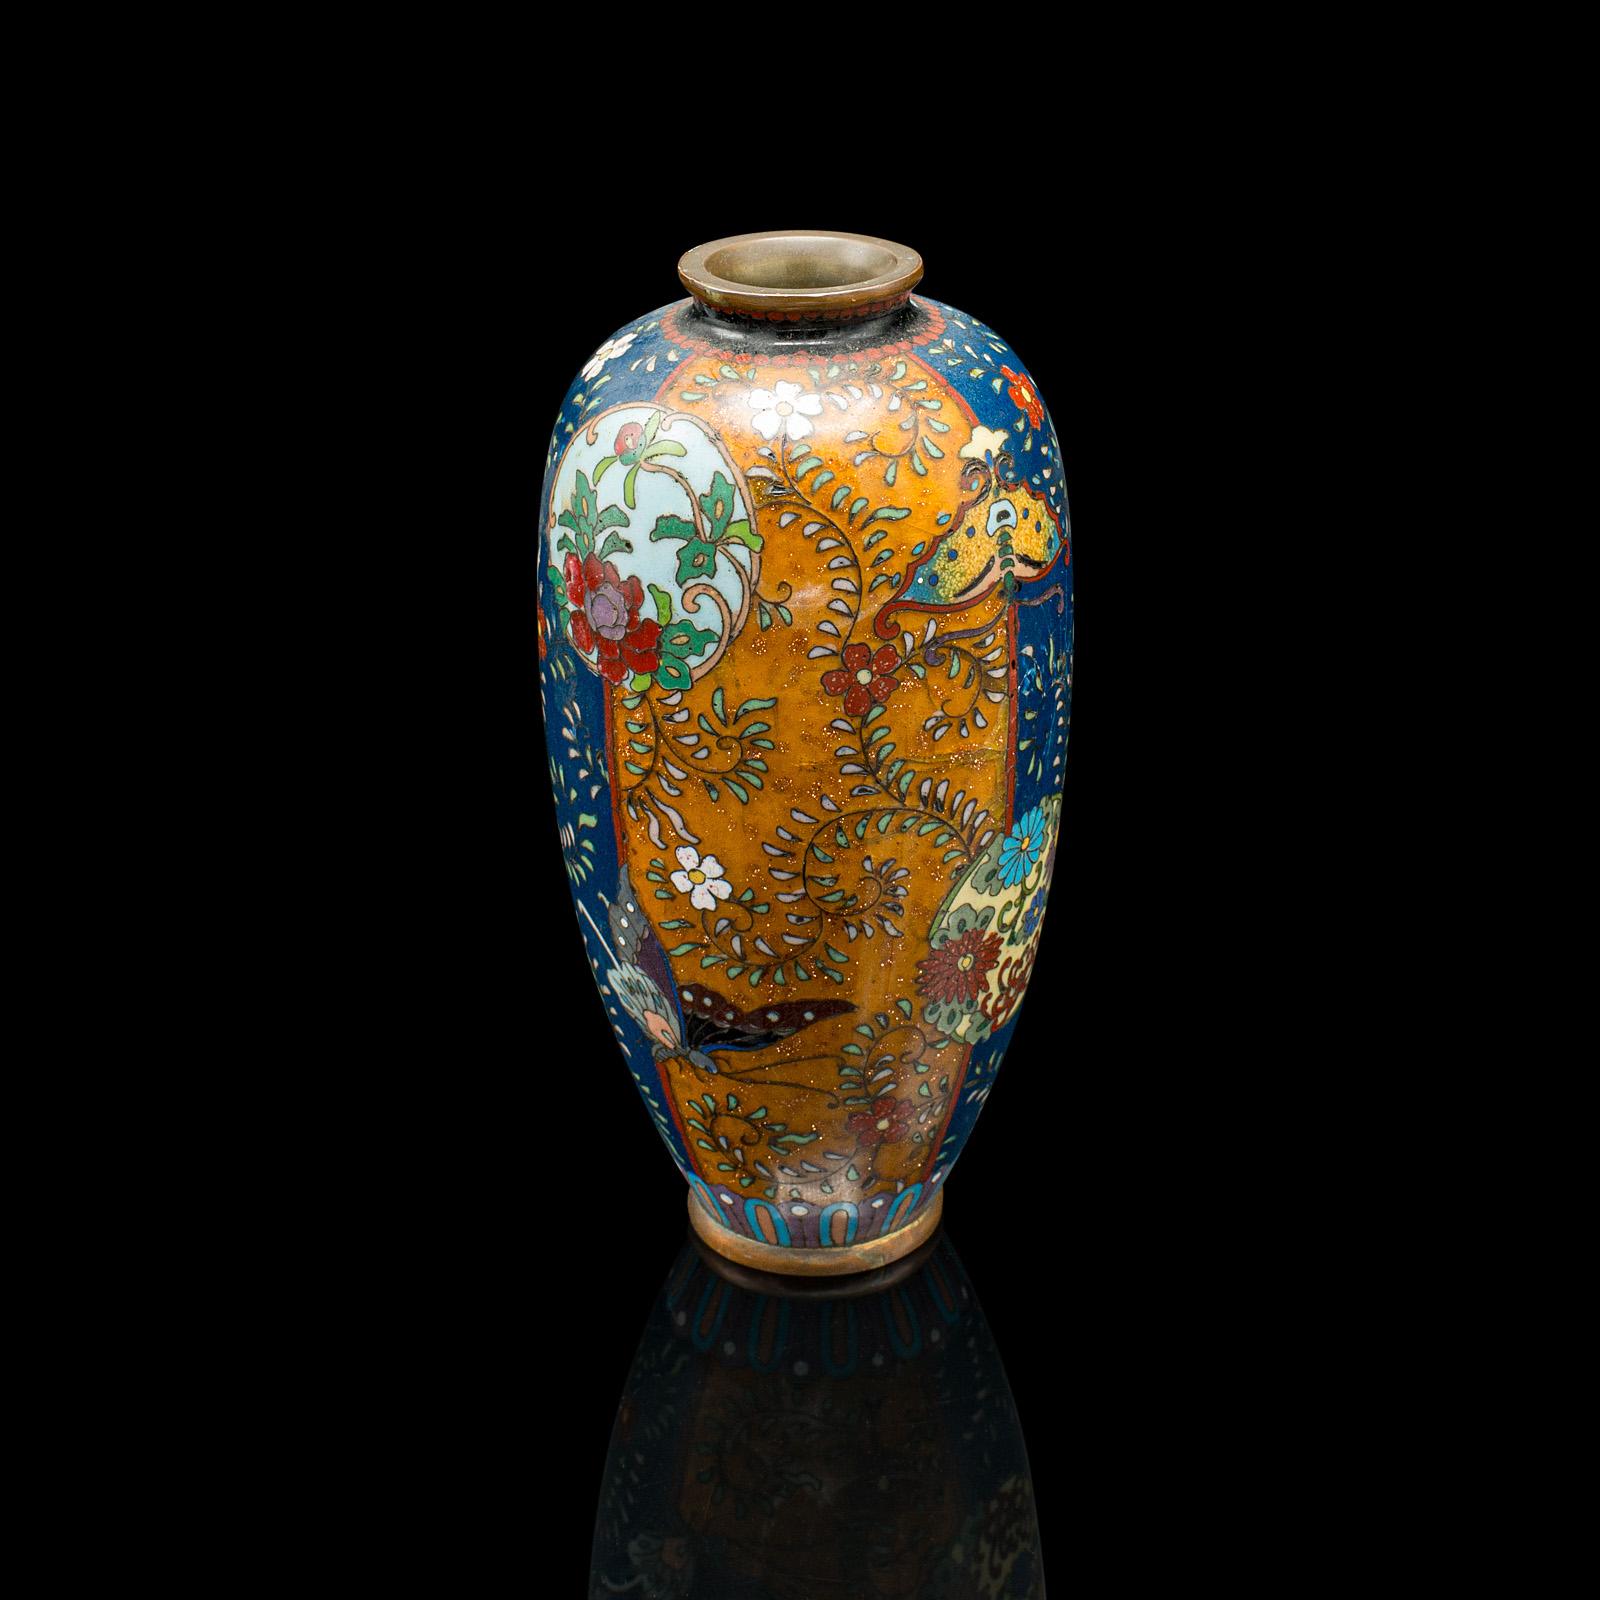 This is a small antique Meiji posy vase. A Japanese, Nagoya cloisonne baluster urn, dating to the late Victorian period, circa 1900.

Charmingly petite example of Nagoya cloisonne
Displays a desirable aged patina in original order
Cool, tactile